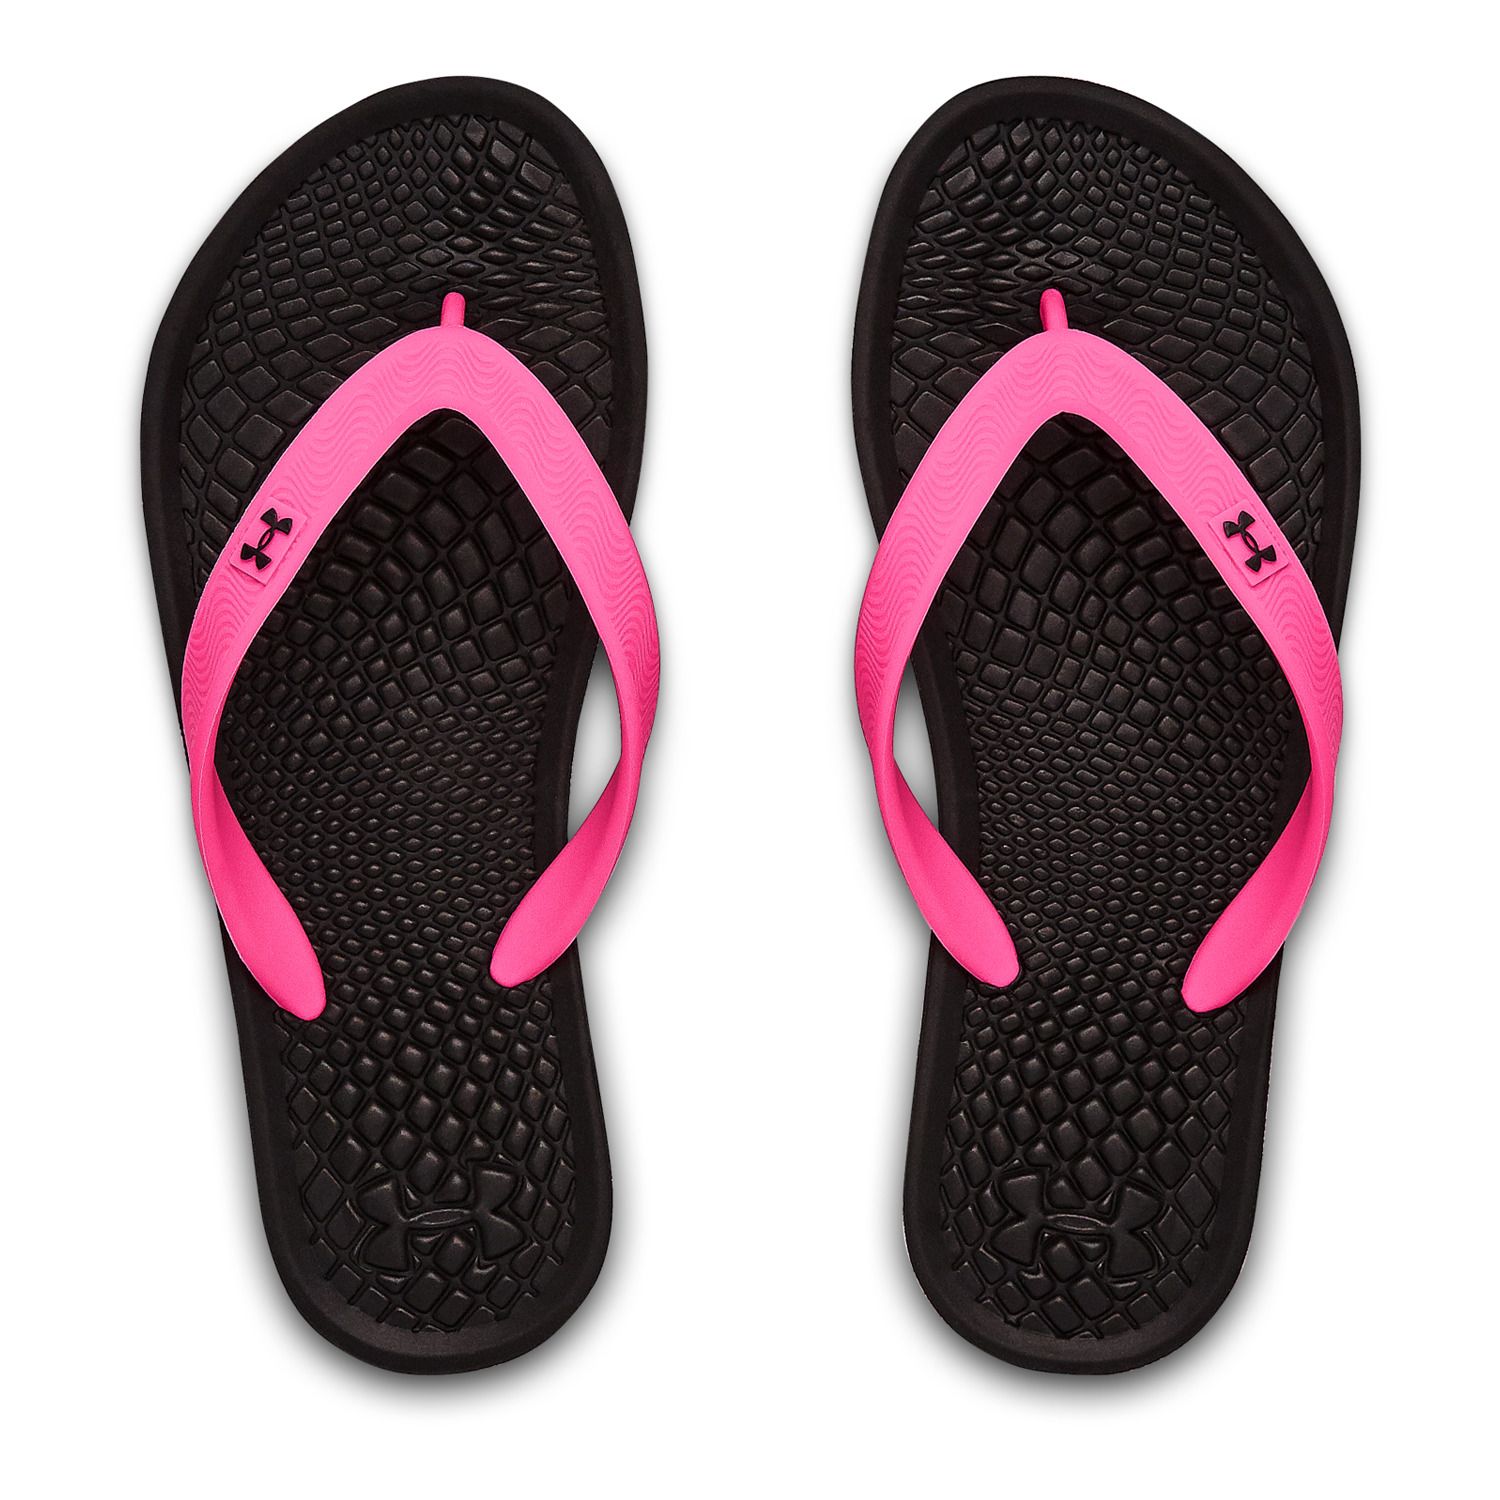 under armour sandals youth